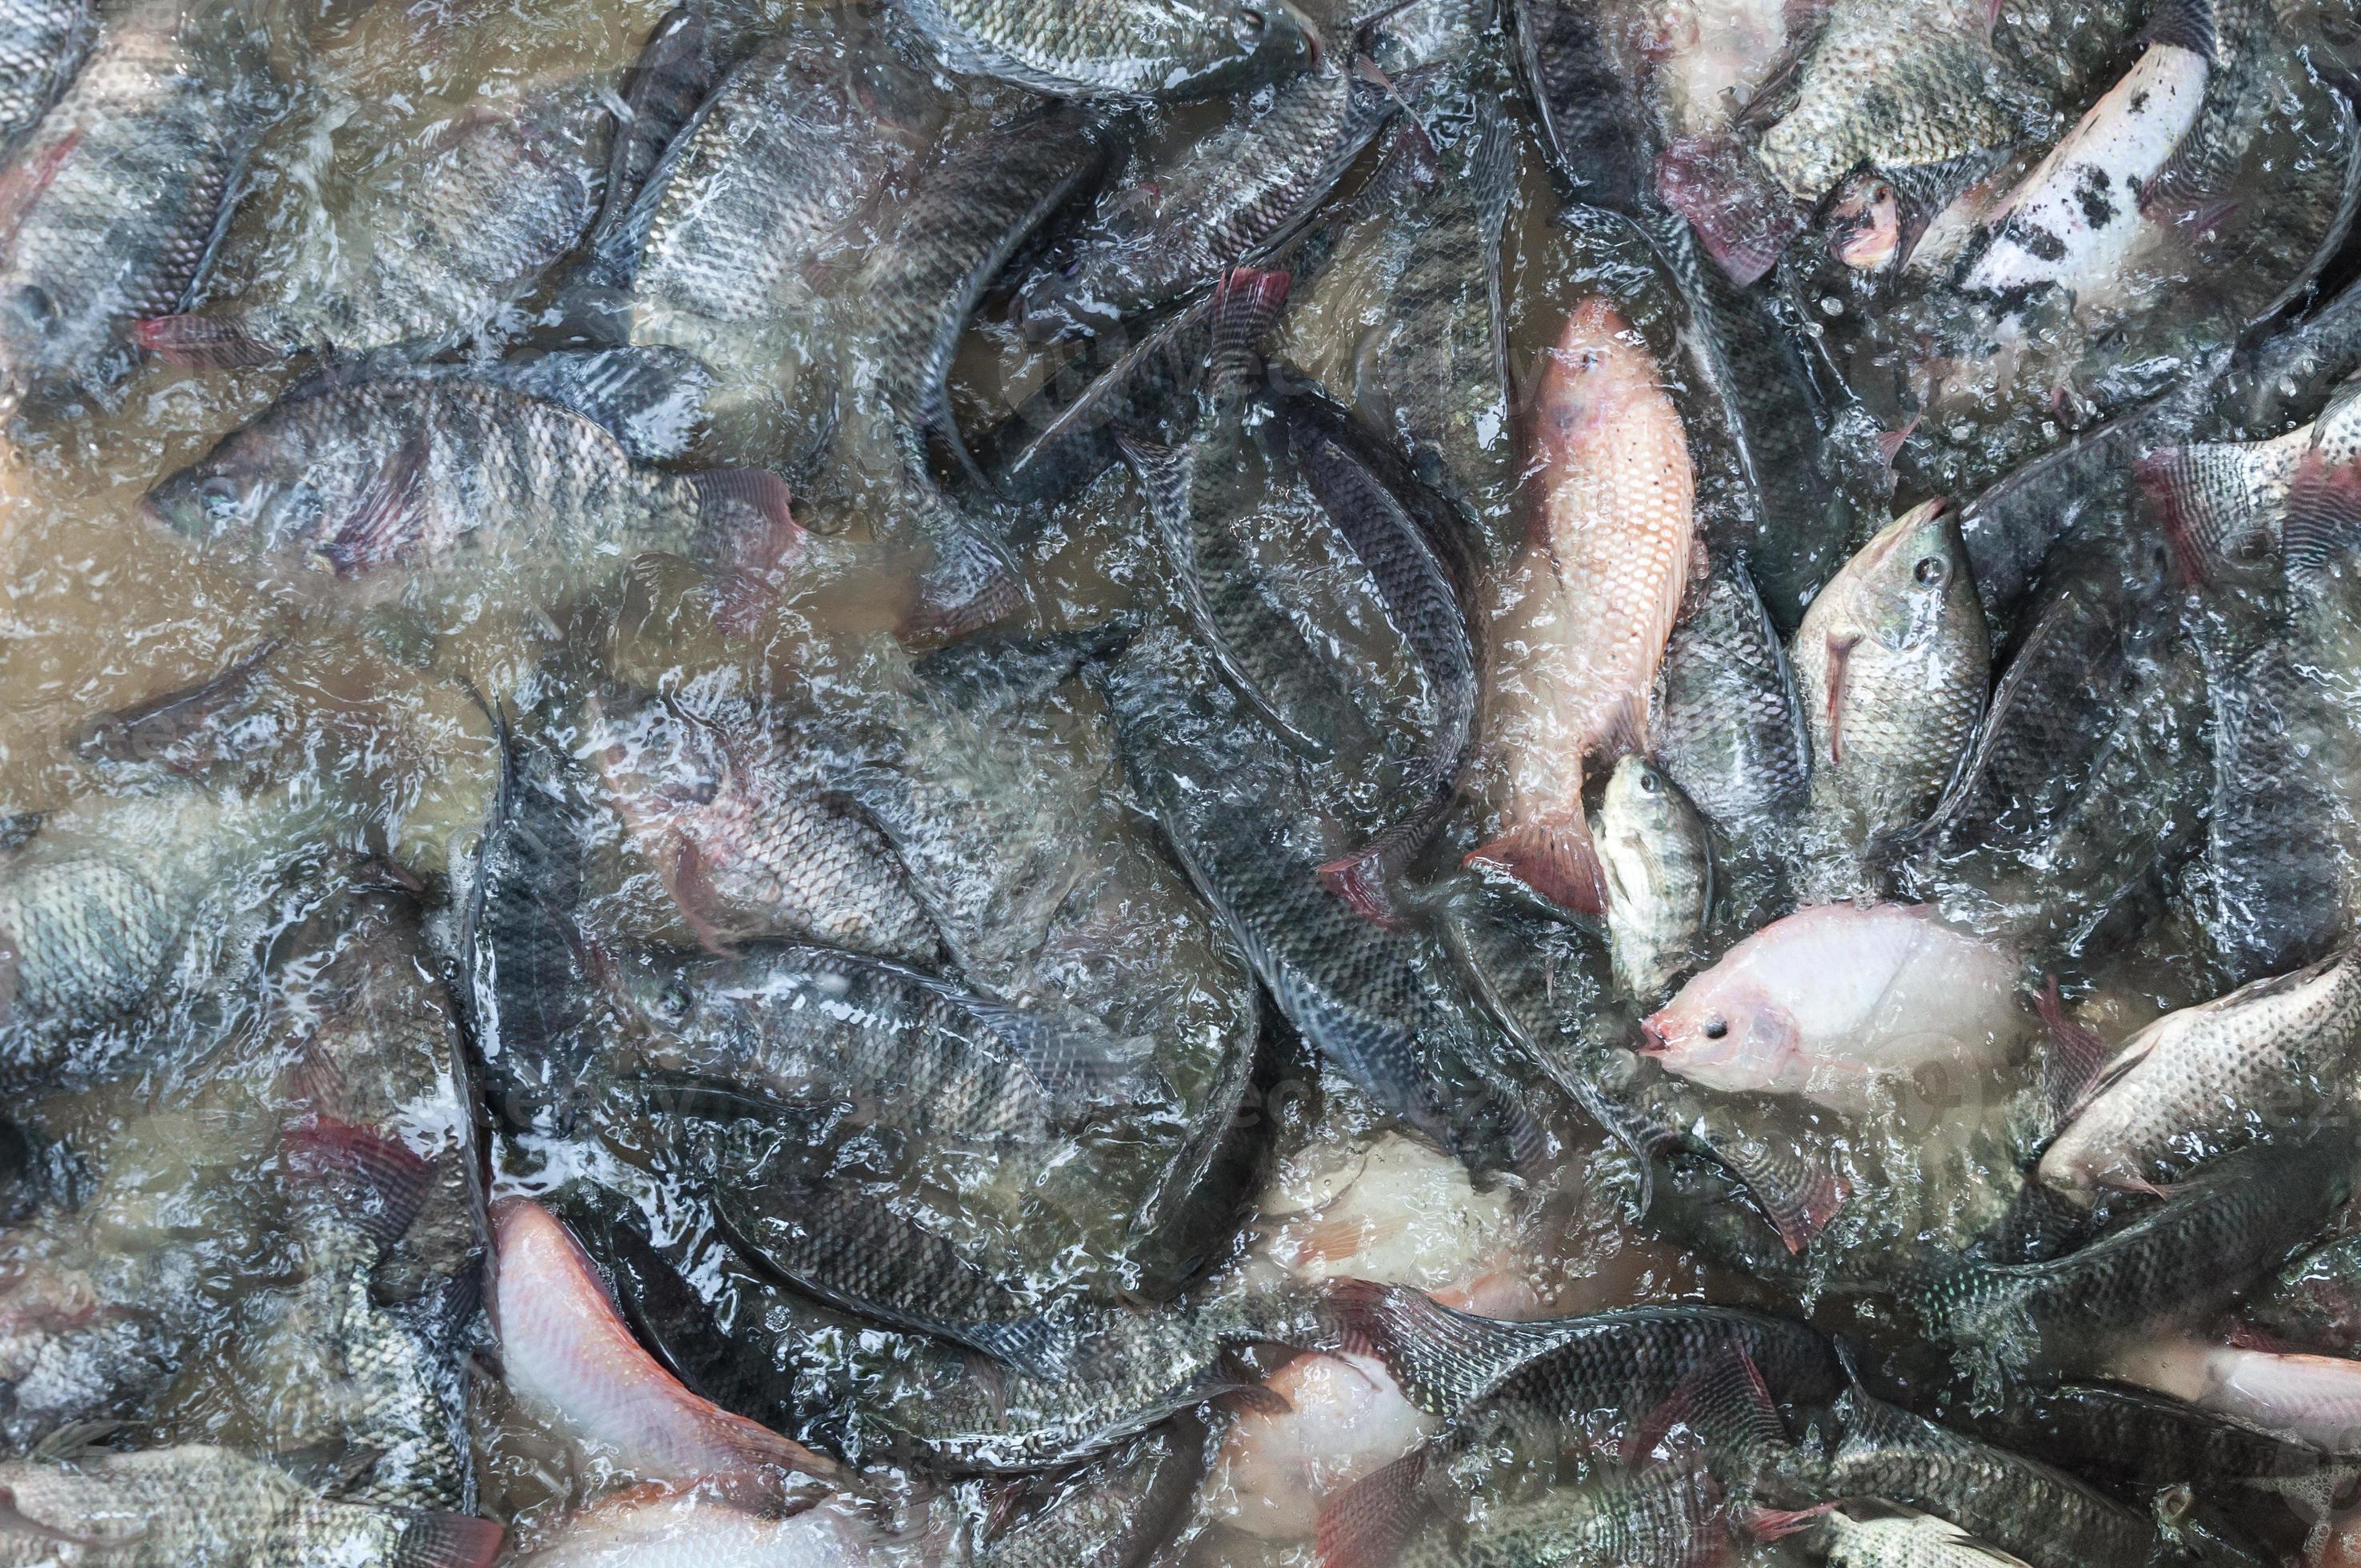 fresh Tilapia and red tilapia in water Farm,fish in the cage, fish